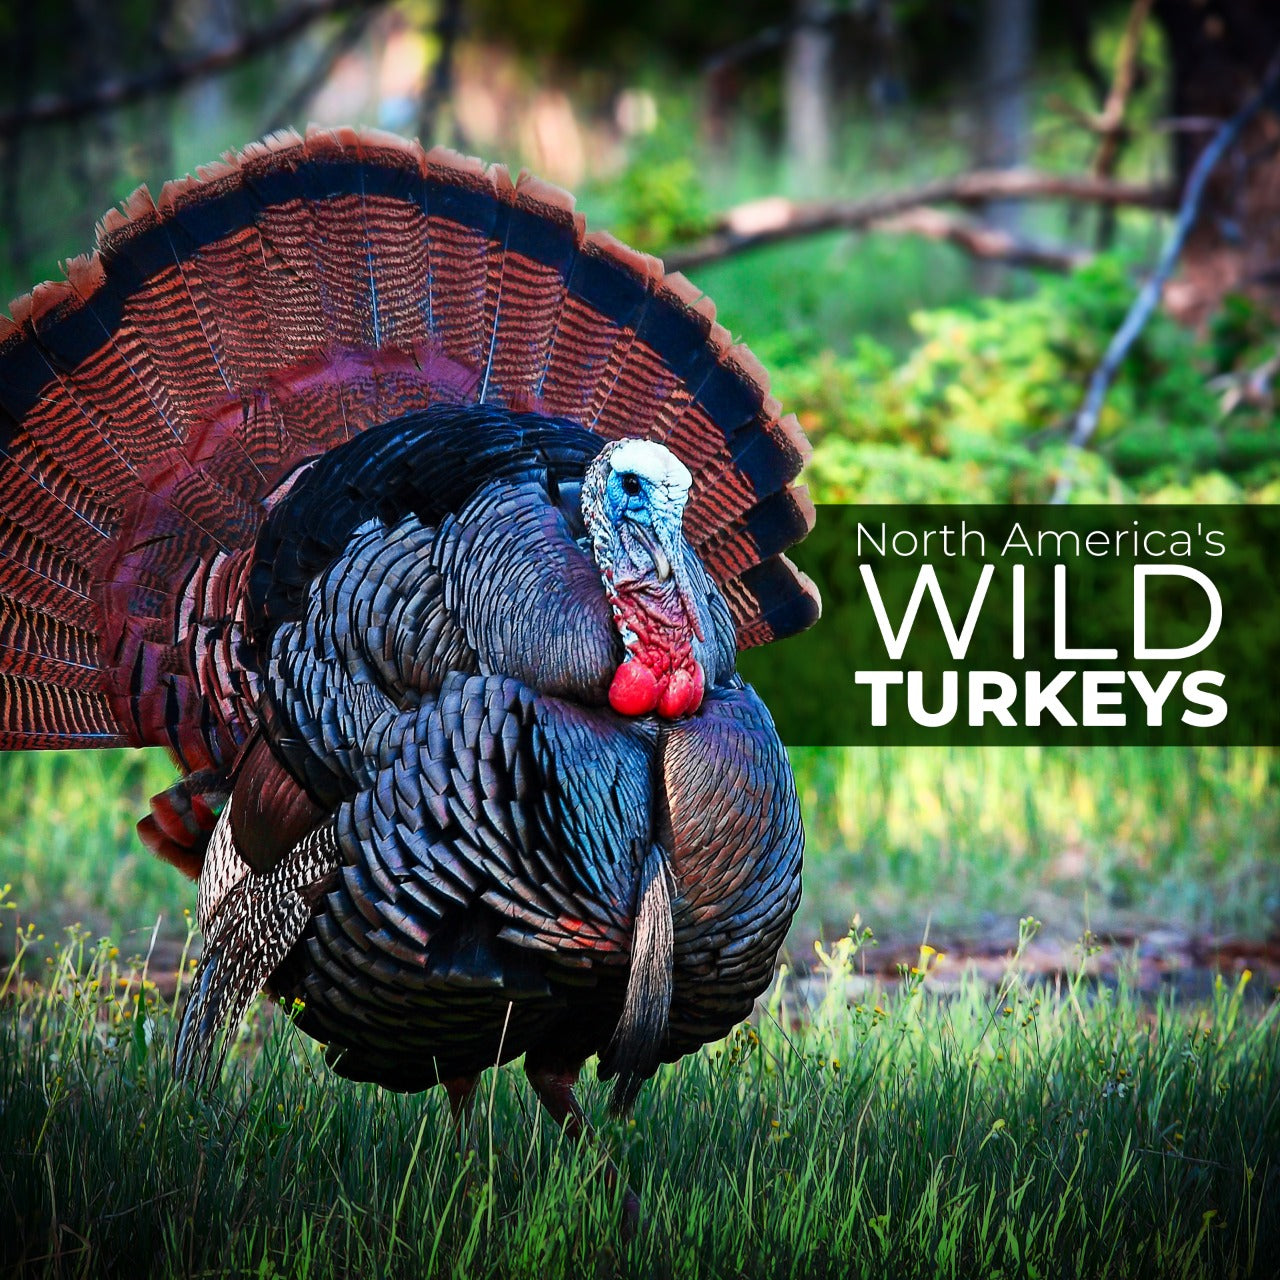 Get Ready for the Turkey Hunting Adventure!